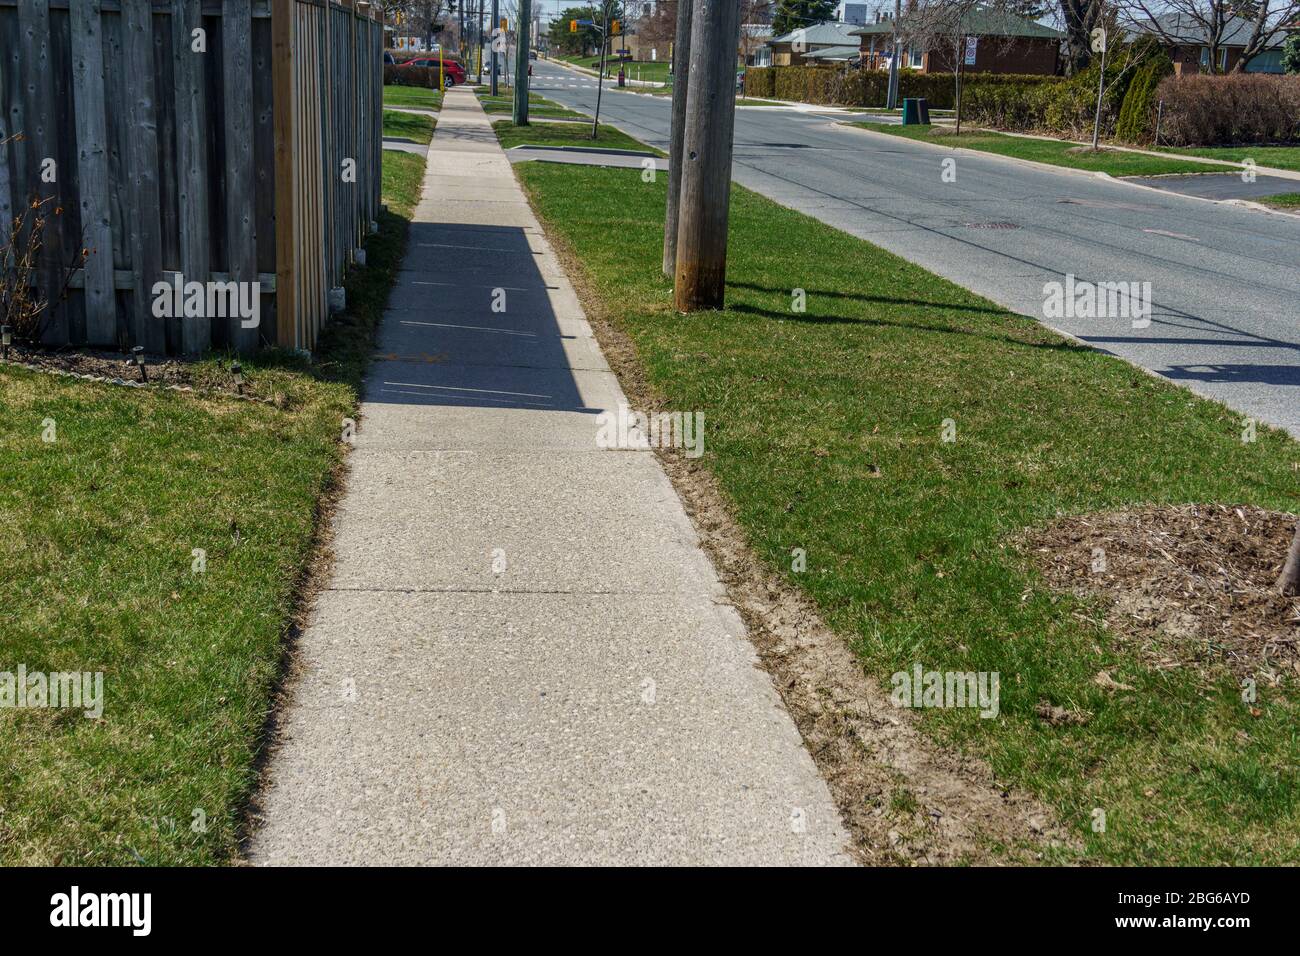 Empty and deserted road and sidewalk during the covid-19 pandemic Stock Photo